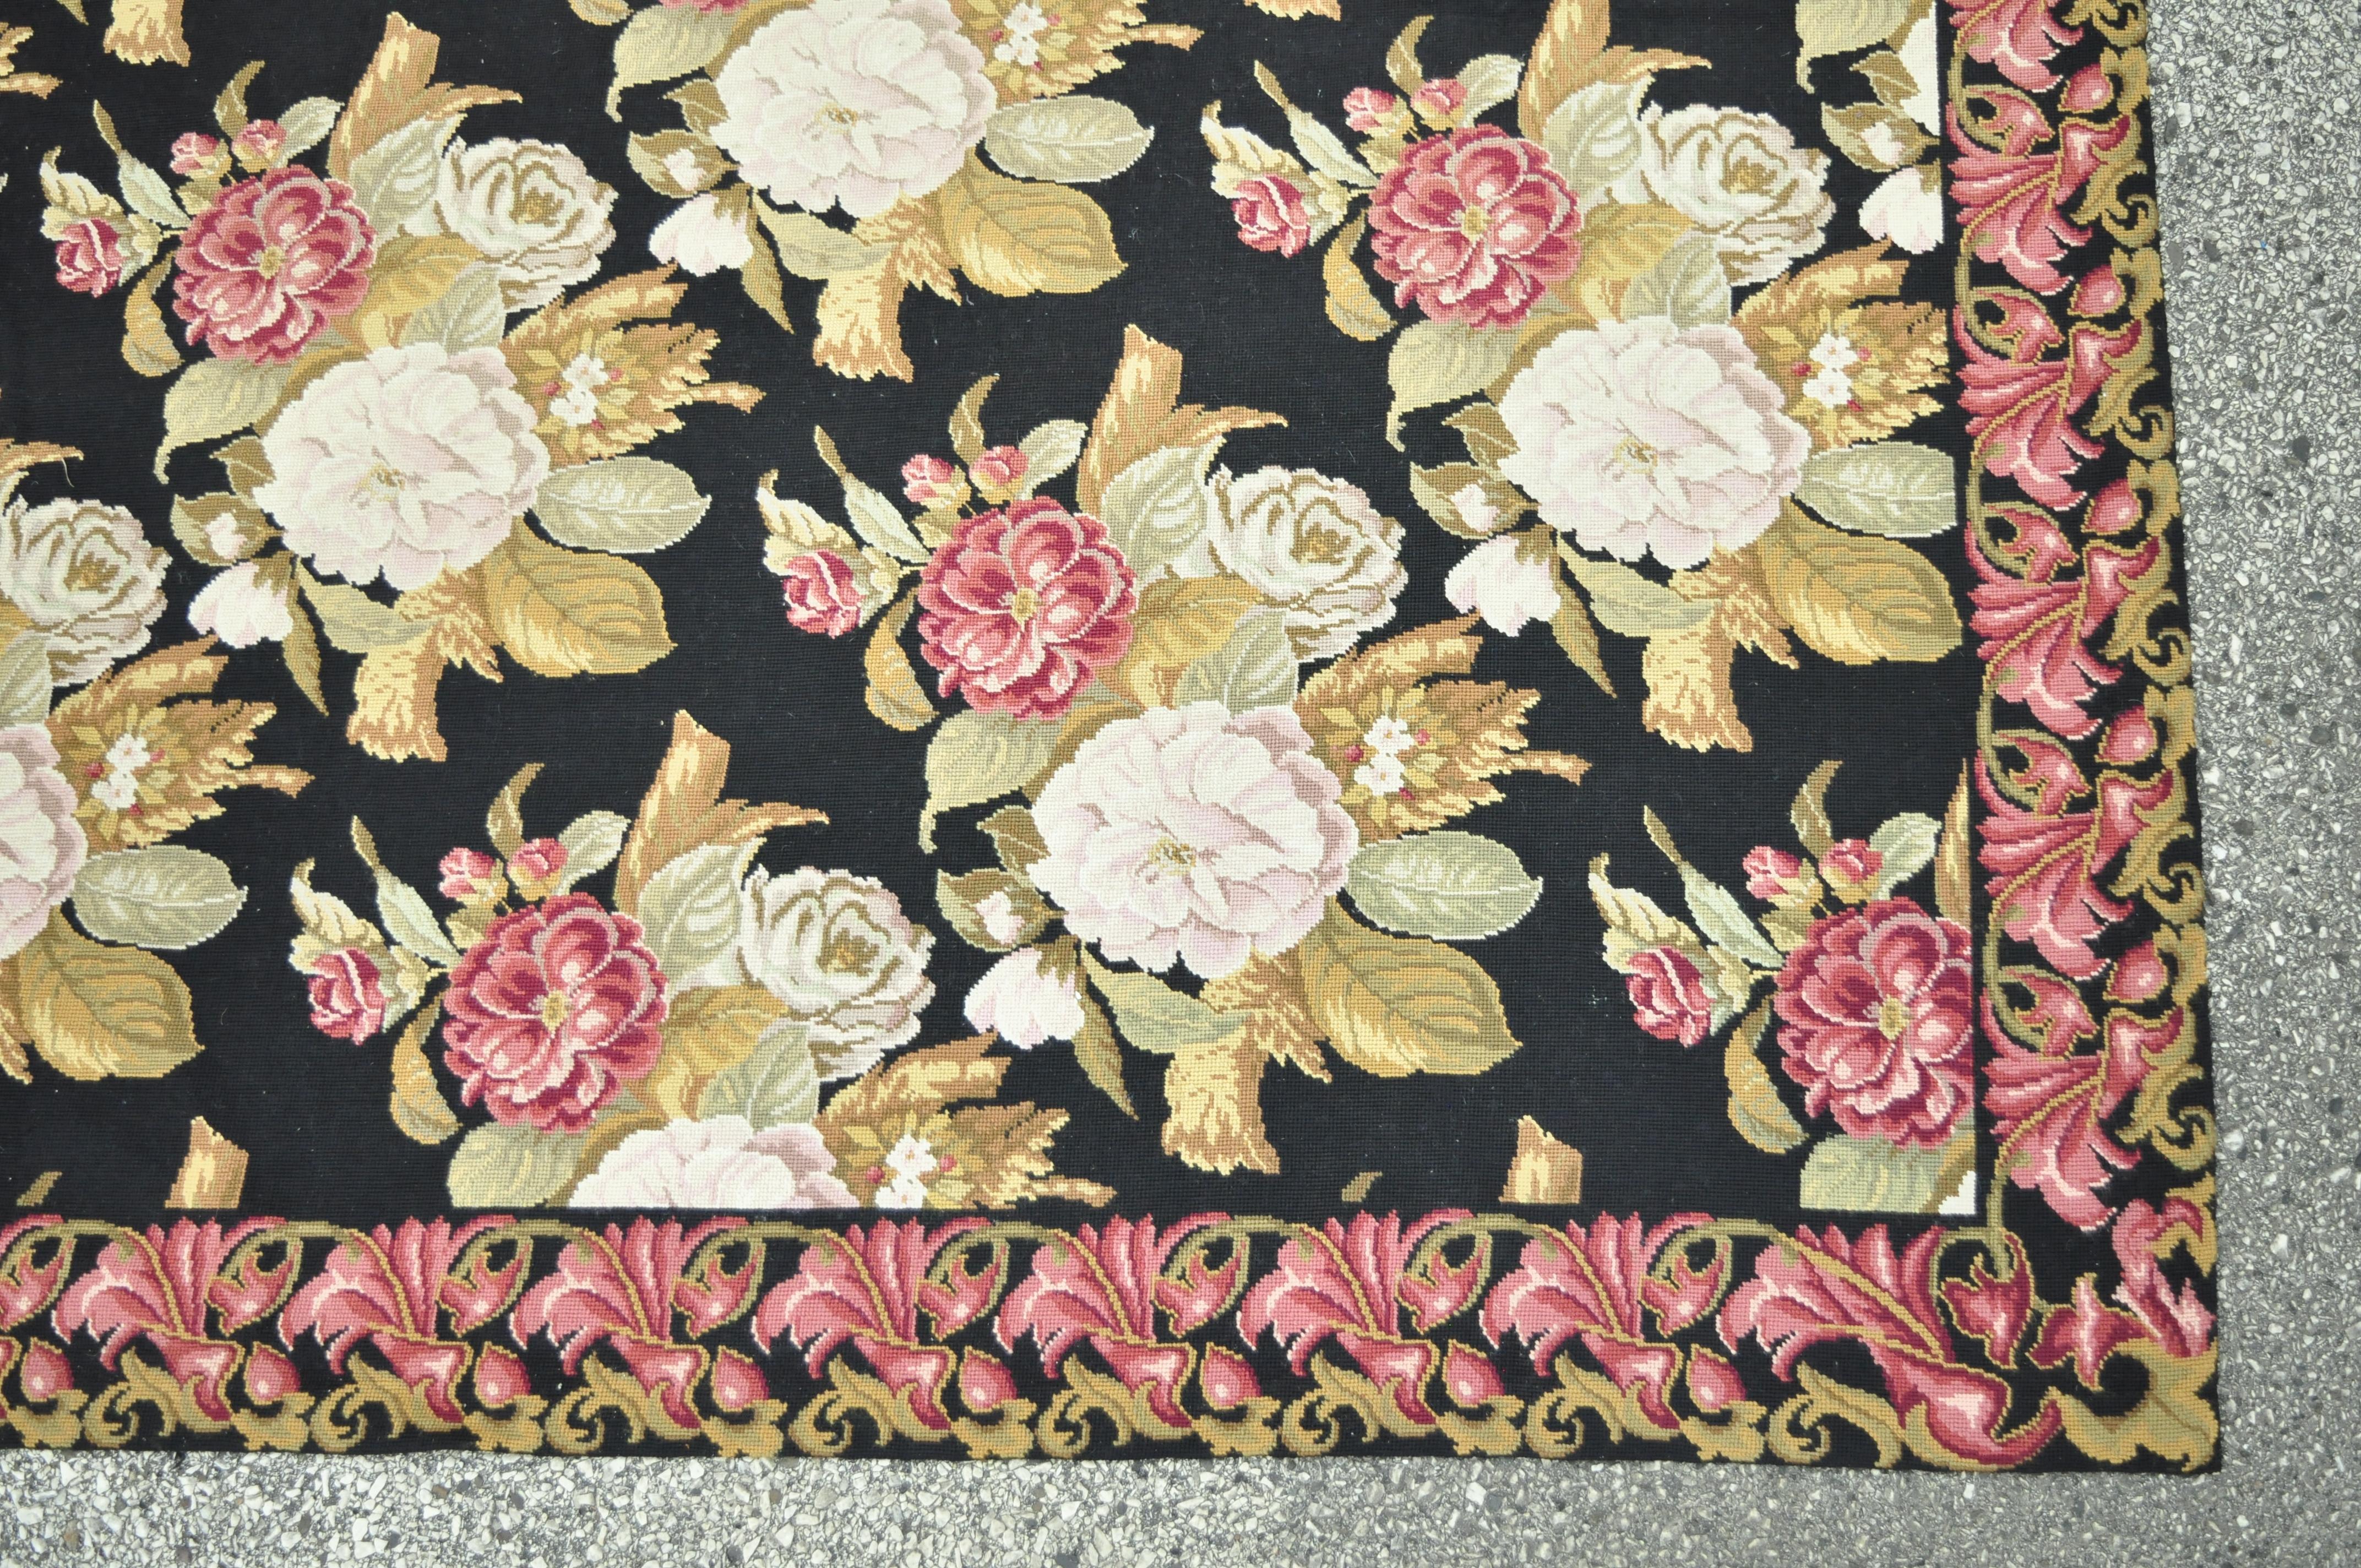 Antique Large American Art Nouveau Floral Hand Hooked Wool Rug Carpet In Good Condition For Sale In Philadelphia, PA